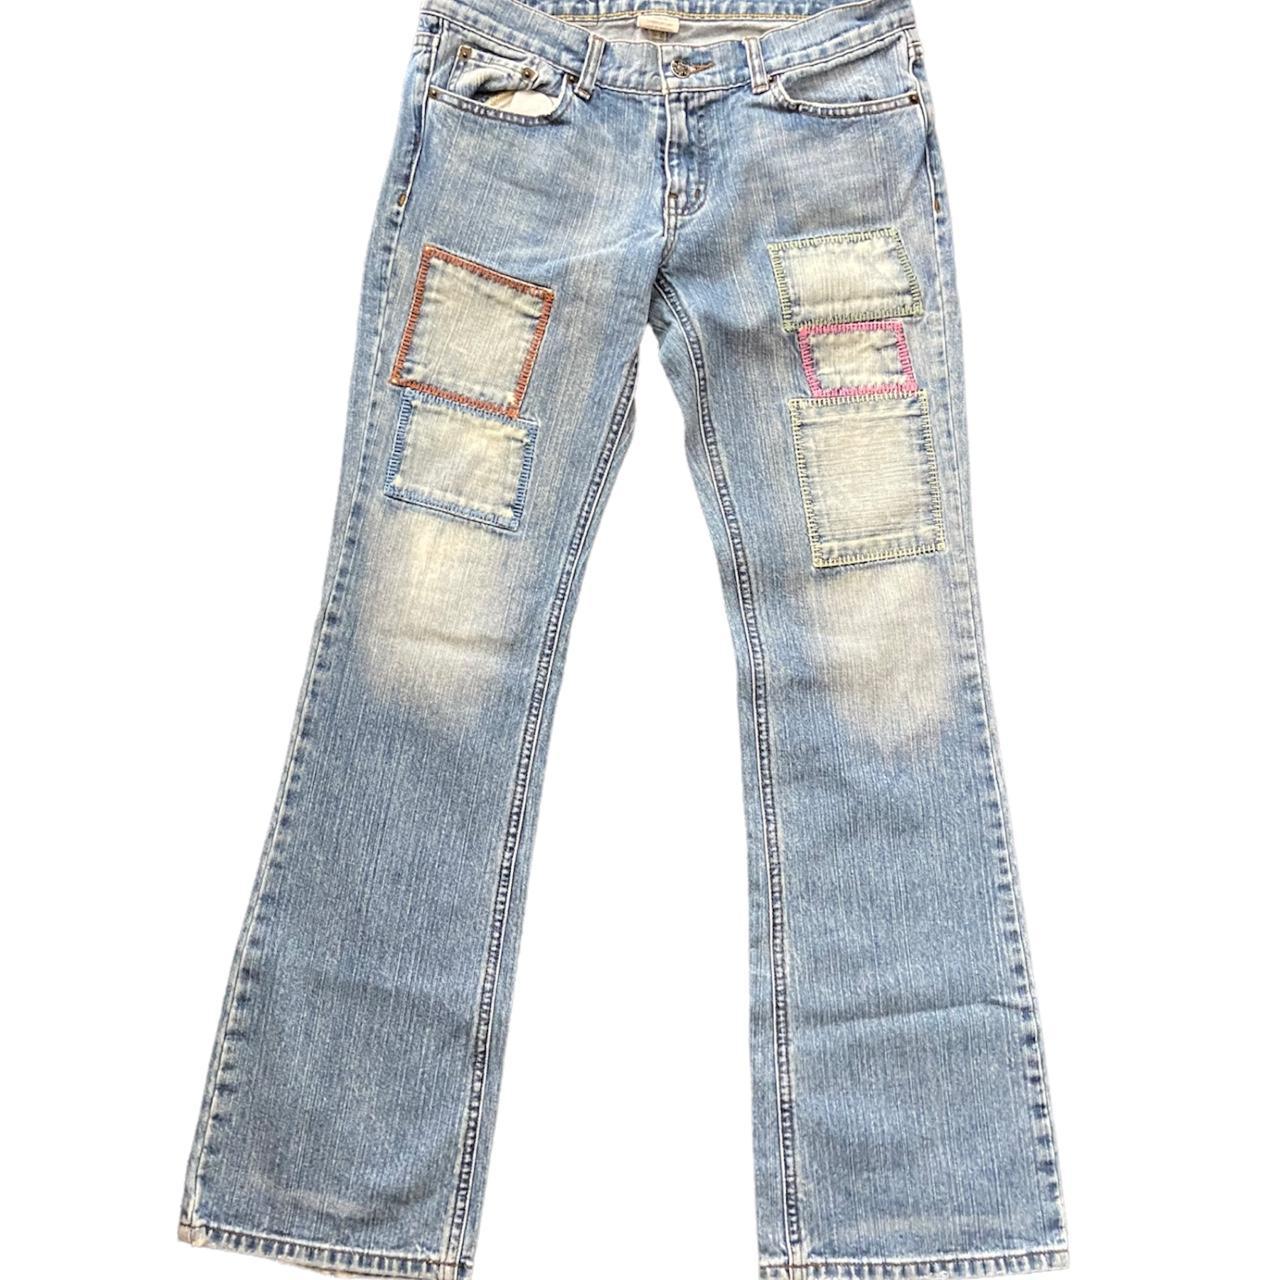 Product Image 1 - Kaptial Jeans look alike 
Size